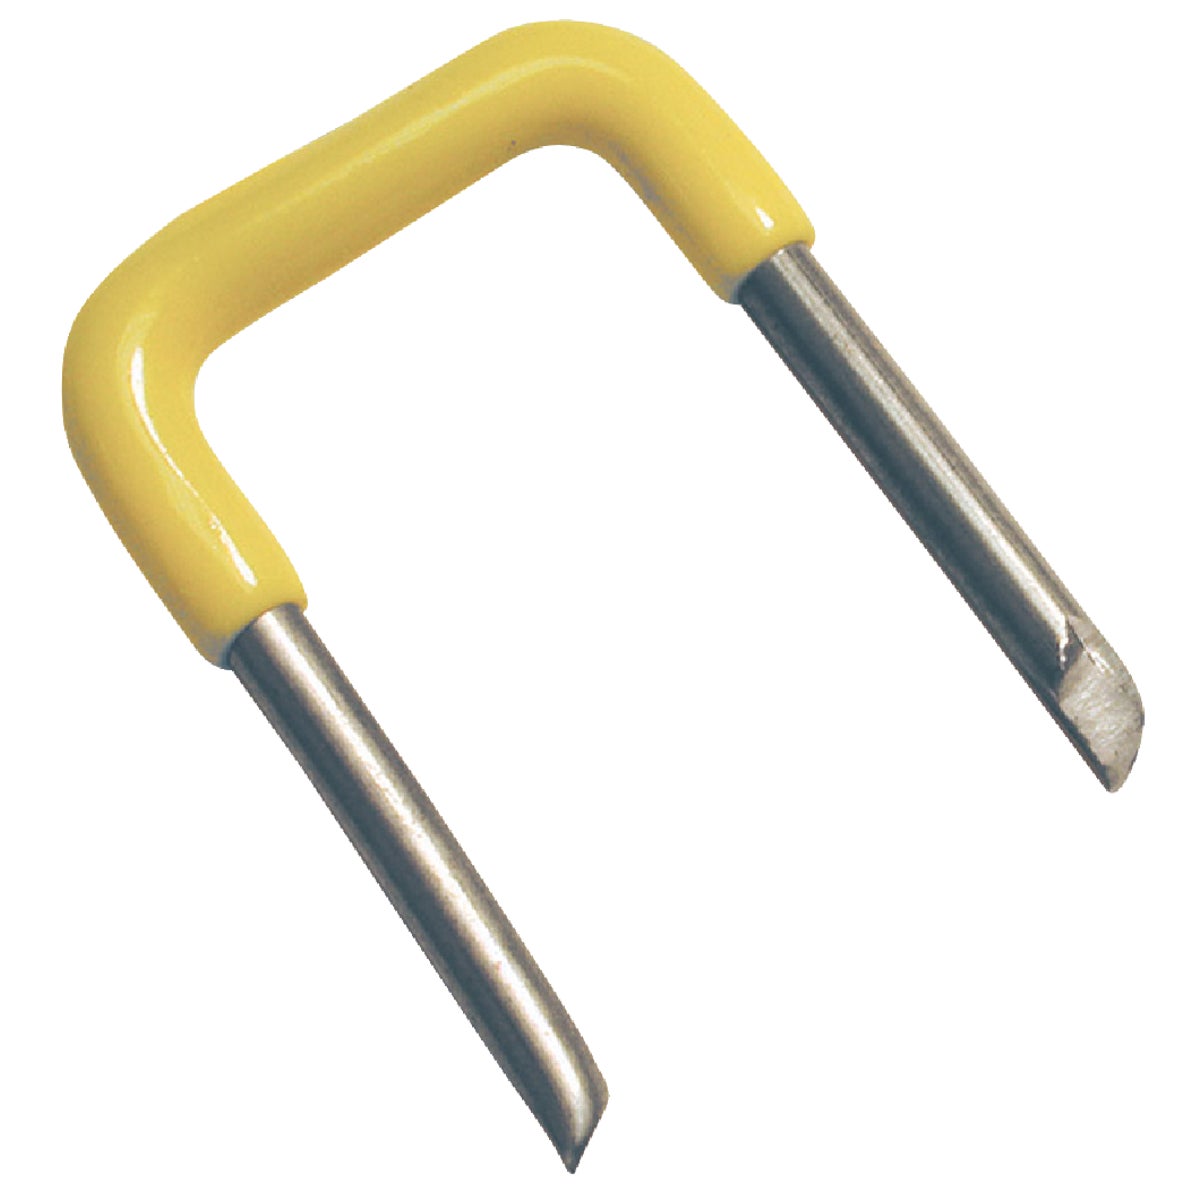 Item 500852, Insulated cable staple featuring high-impact hot melt bonded PVC.